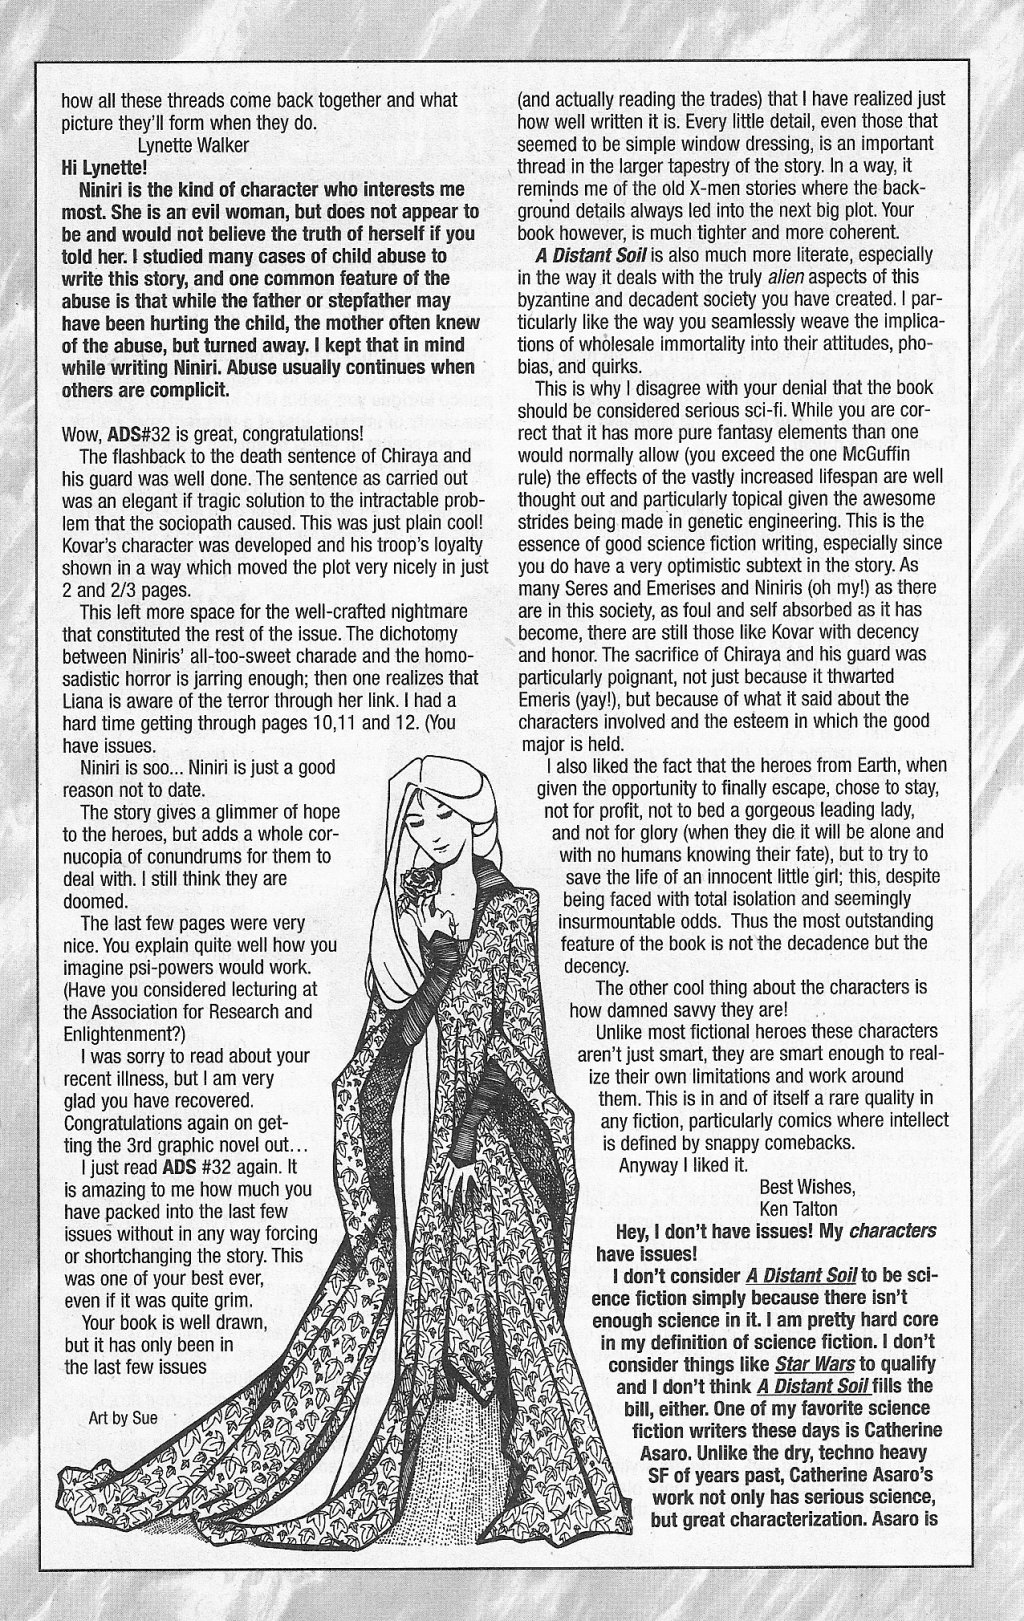 Read online A Distant Soil comic -  Issue #33 - 26